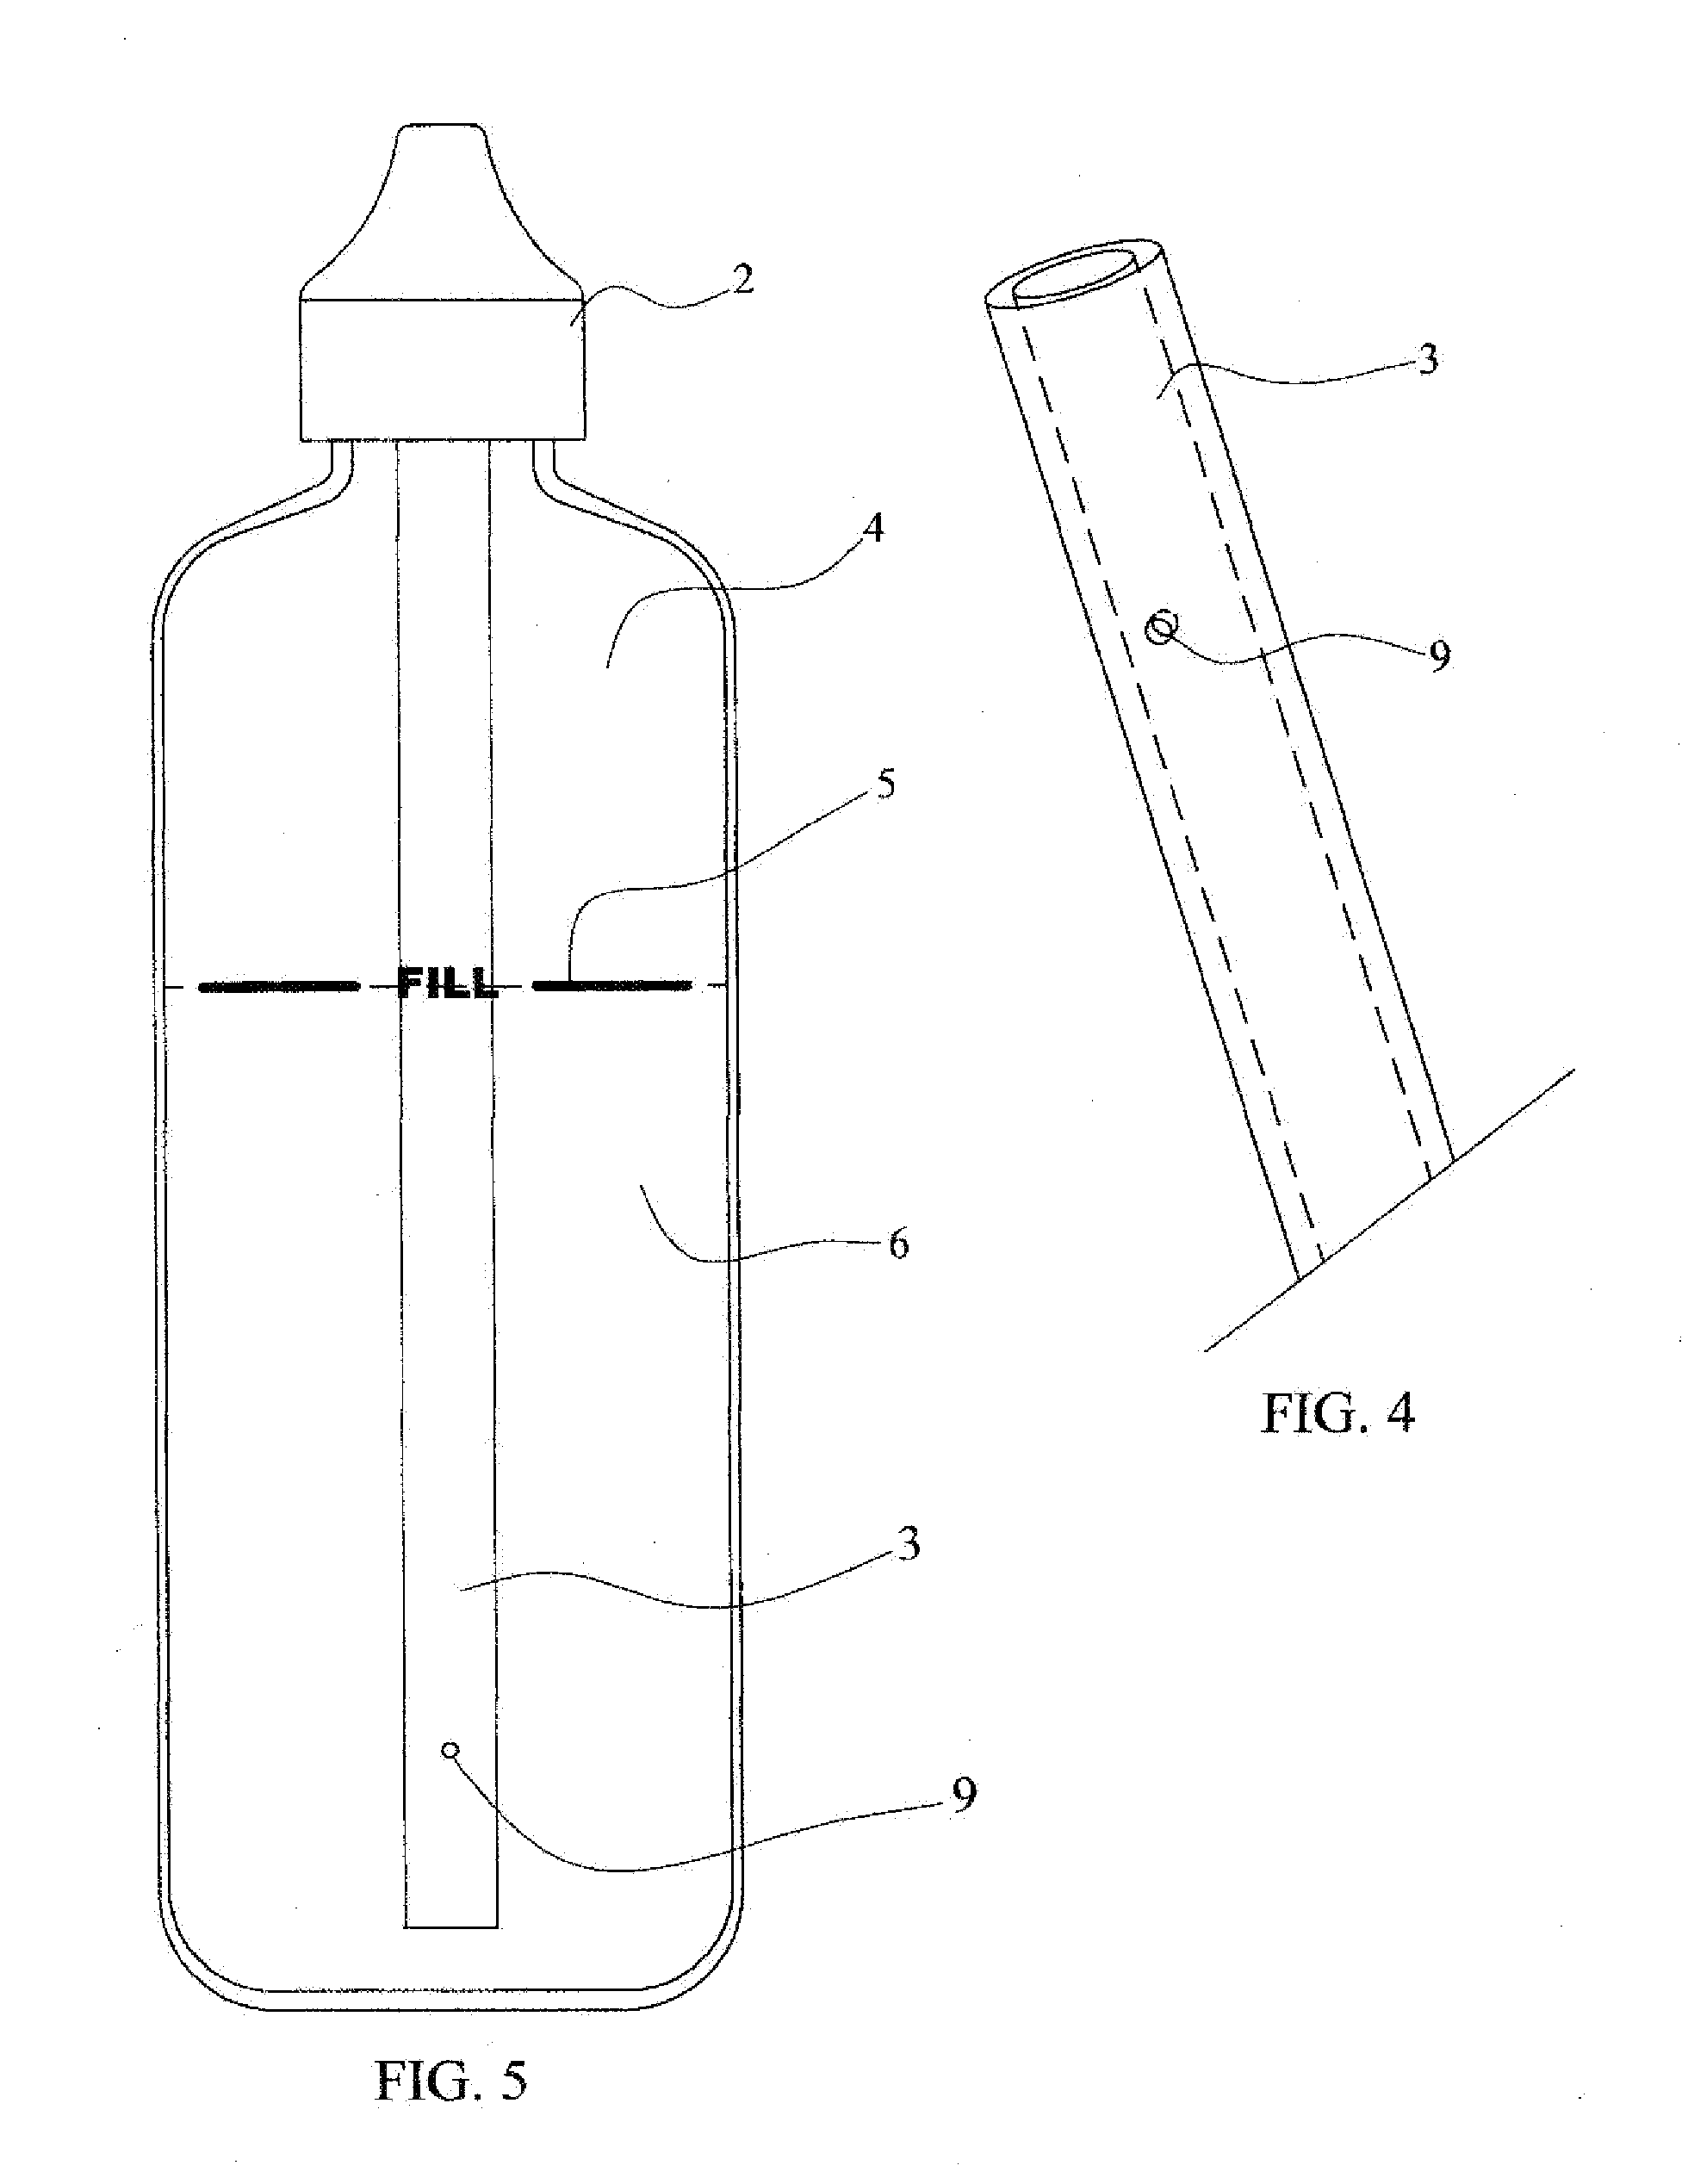 High Flow Volume Nasal Irrigation Device and Method for Alternating Pulsatile and Continuous Fluid Flow